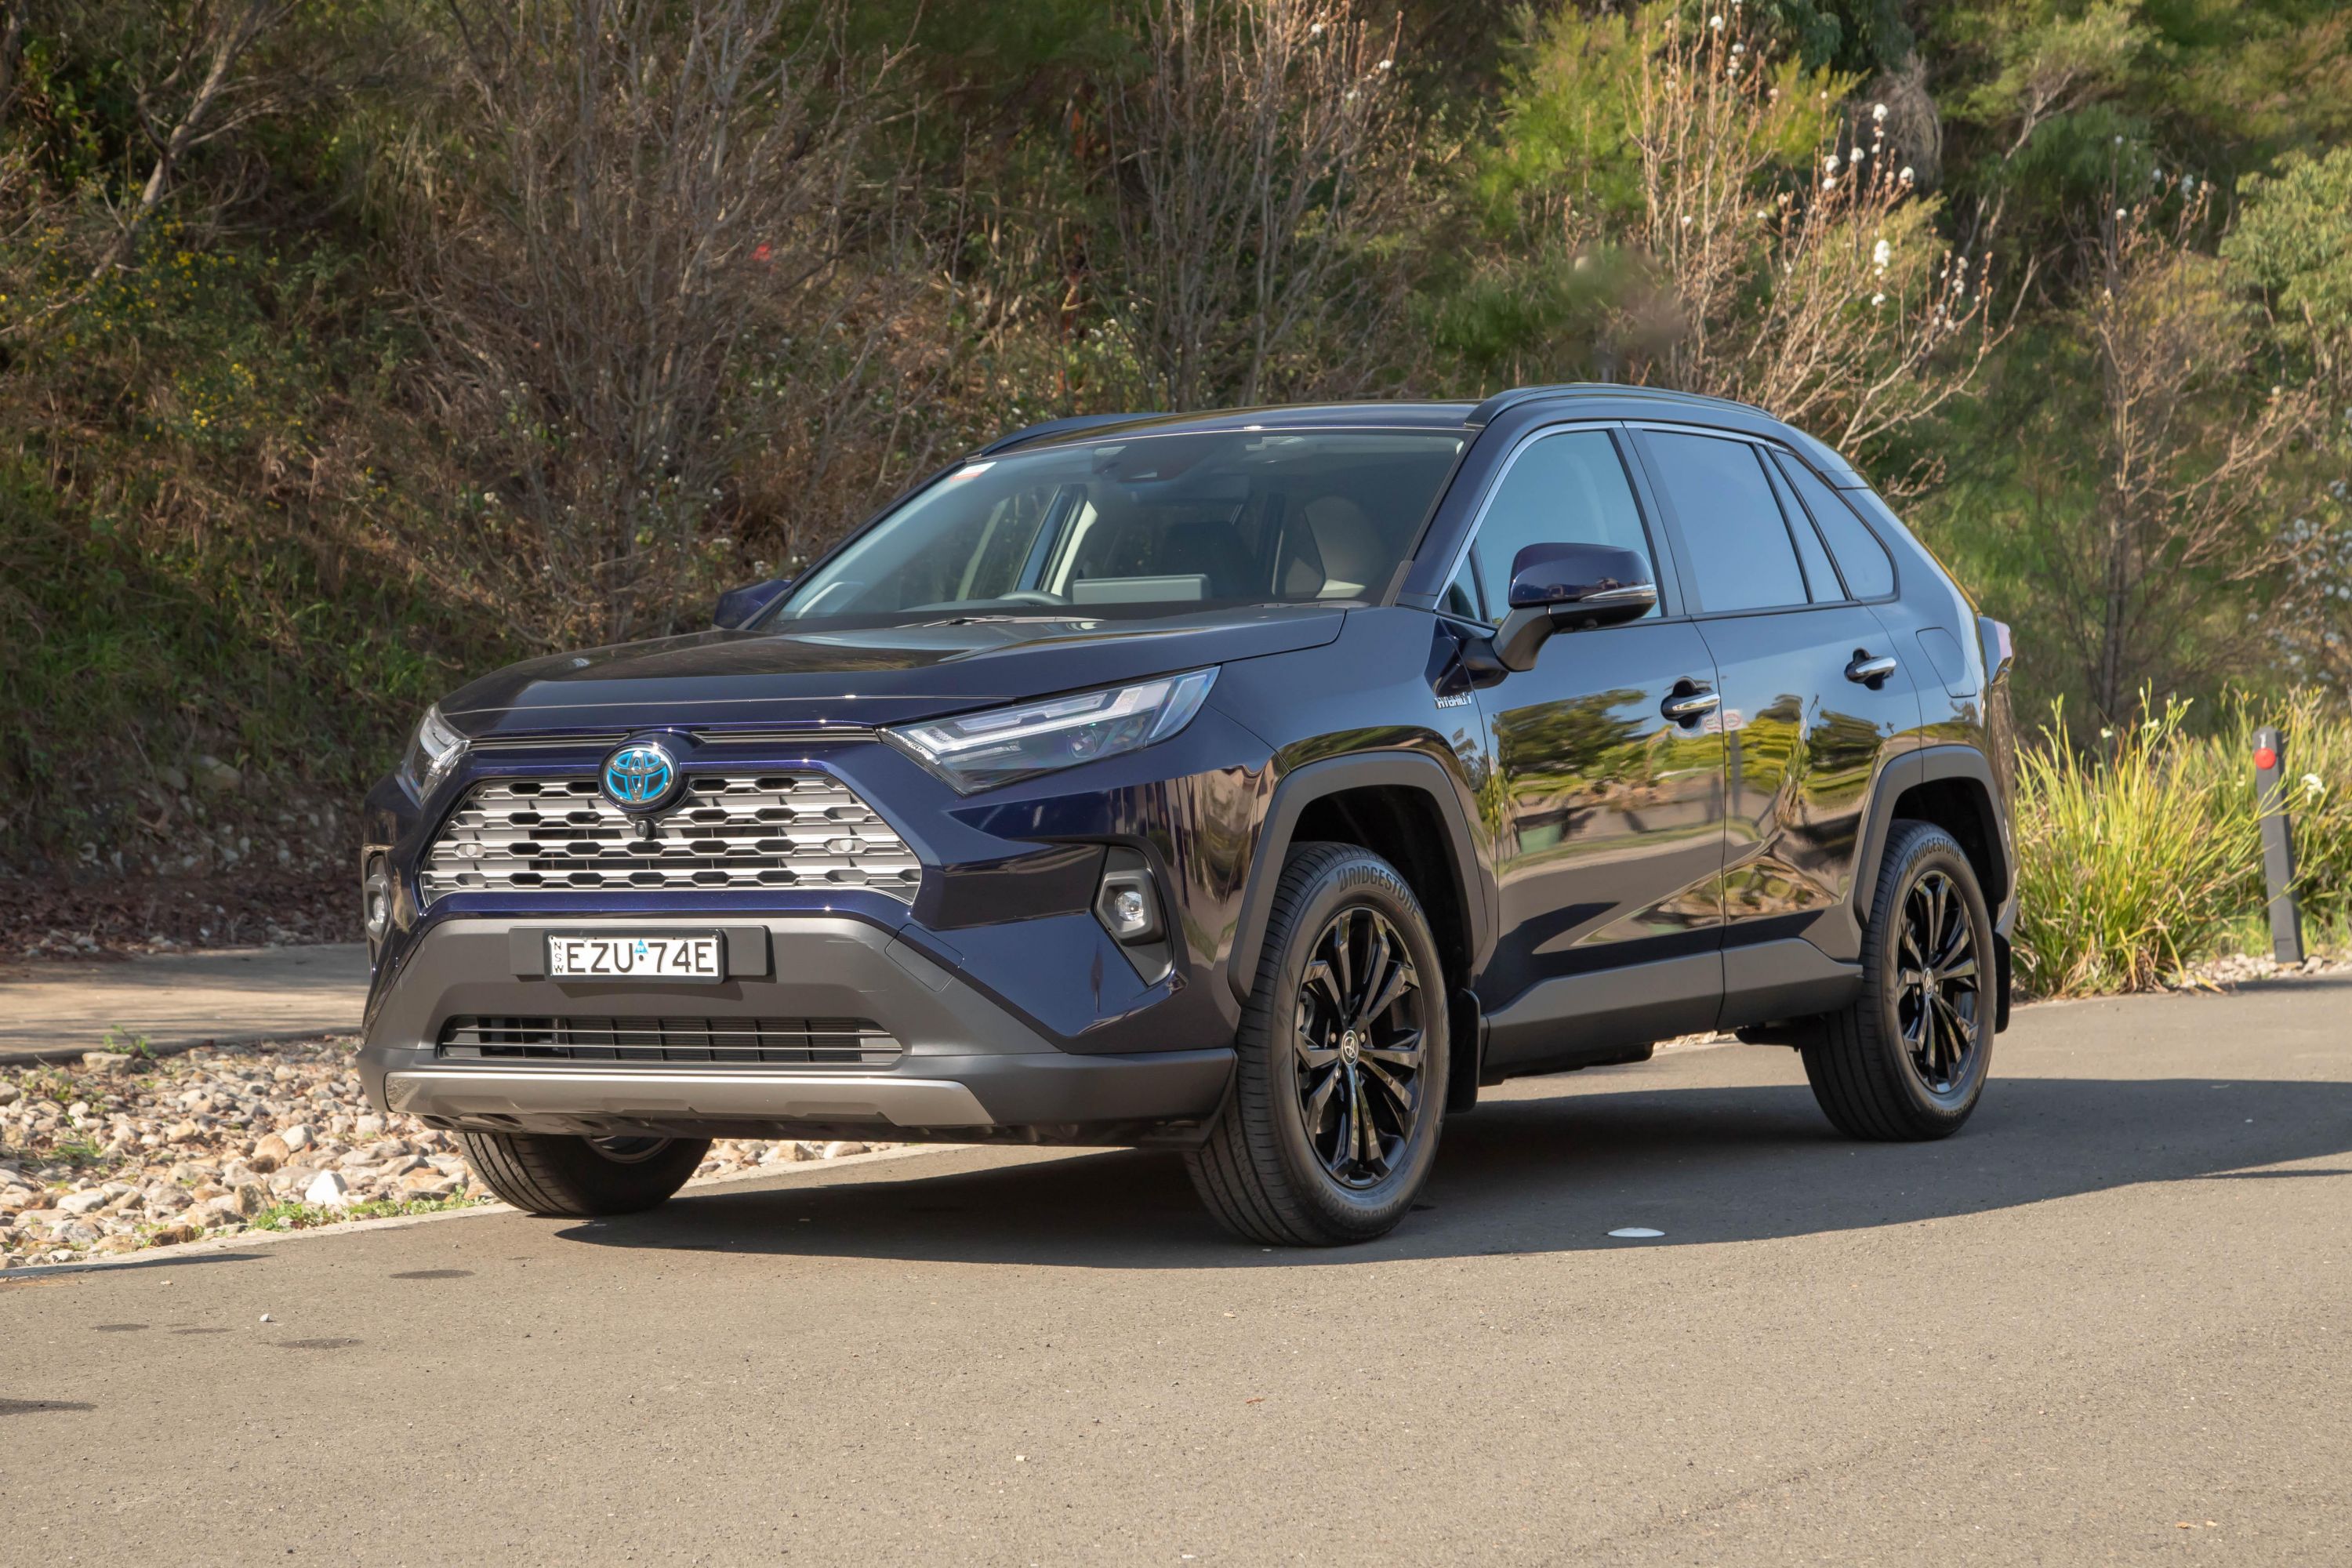 Auto review: 2023 Toyota RAV4 hybrid offers strong fuel economy